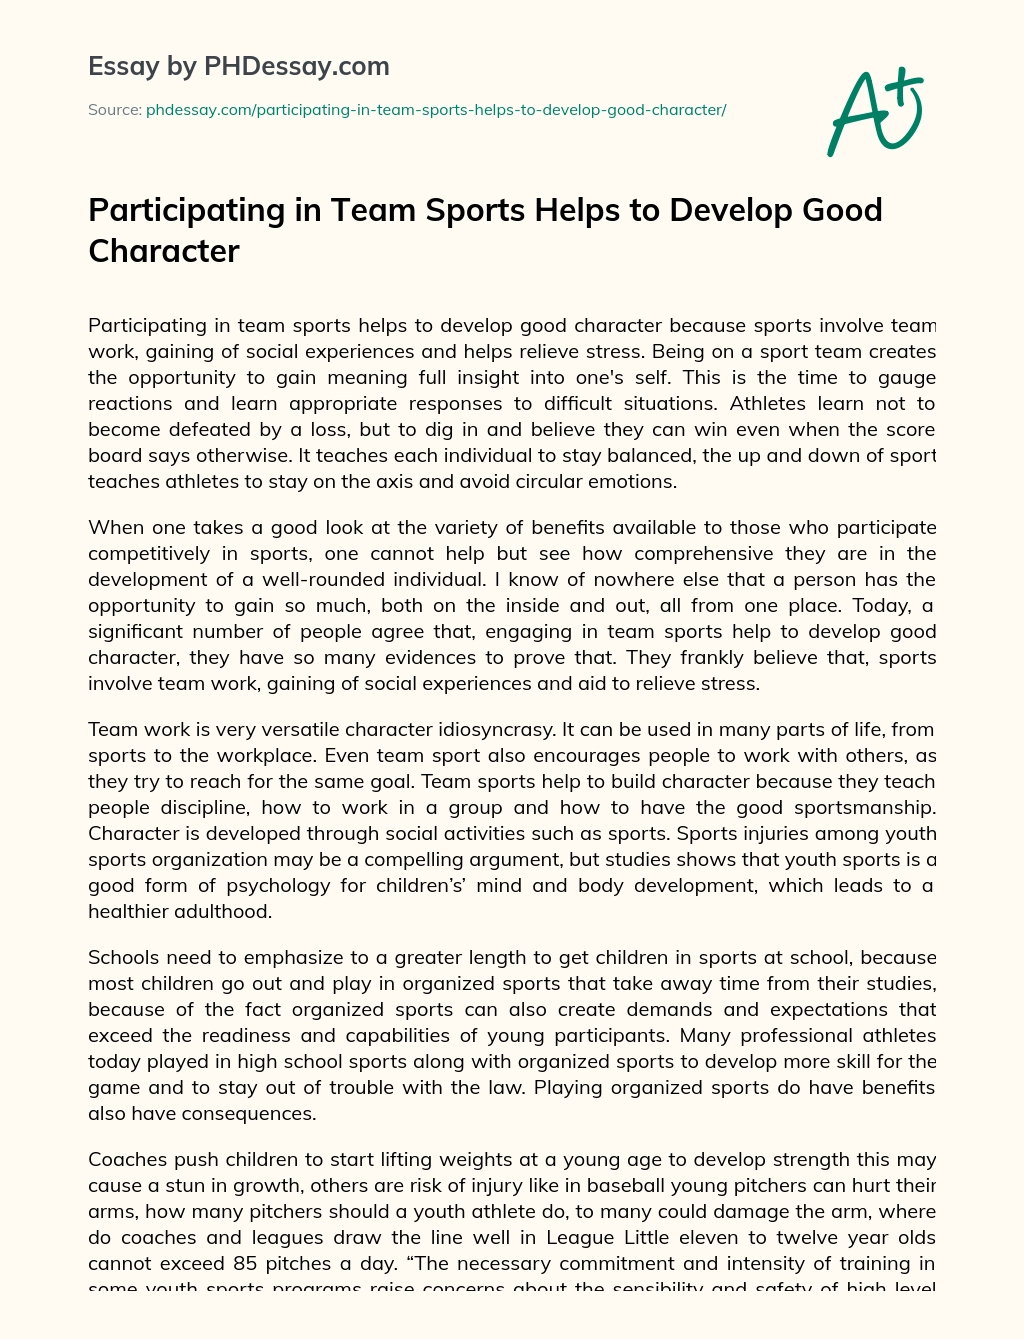 Participating in Team Sports Helps to Develop Good Character essay